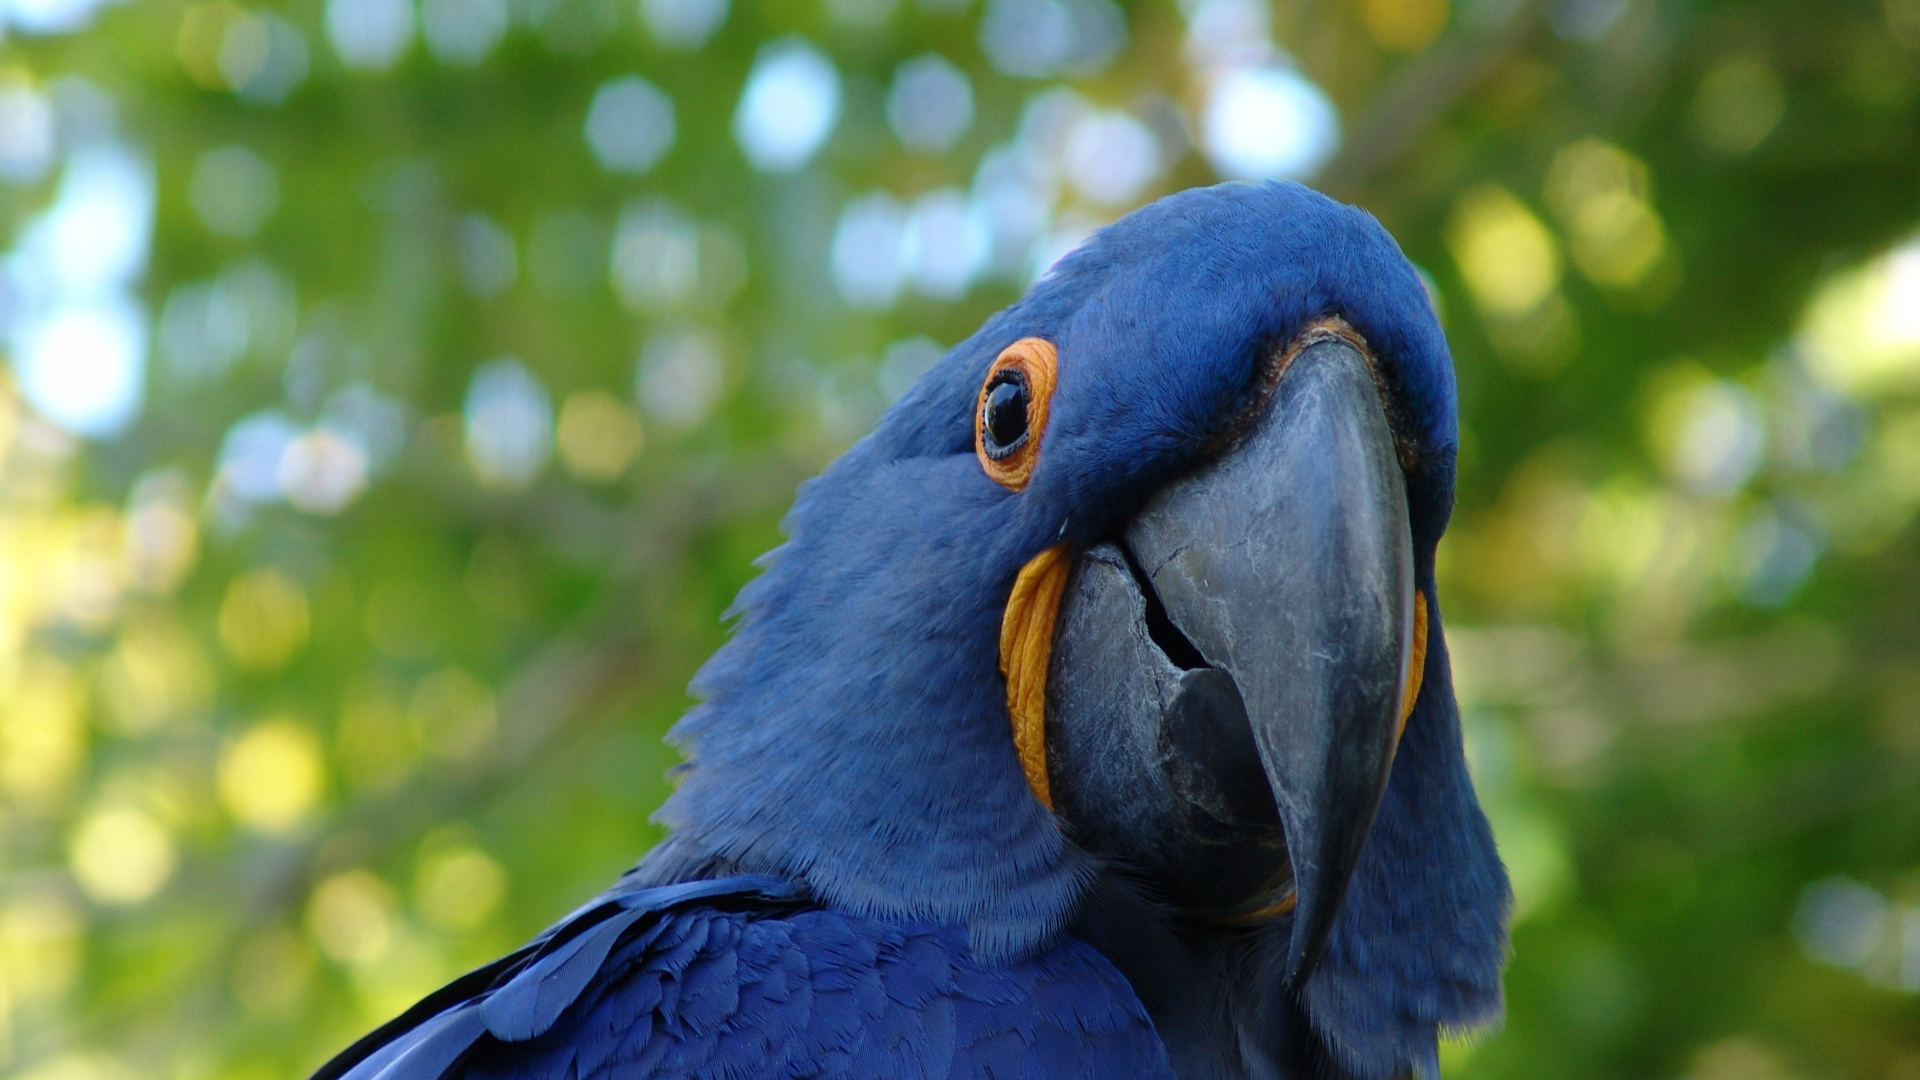 10+ Free Hyacinth Macaw & Parrot Images - Pixabay